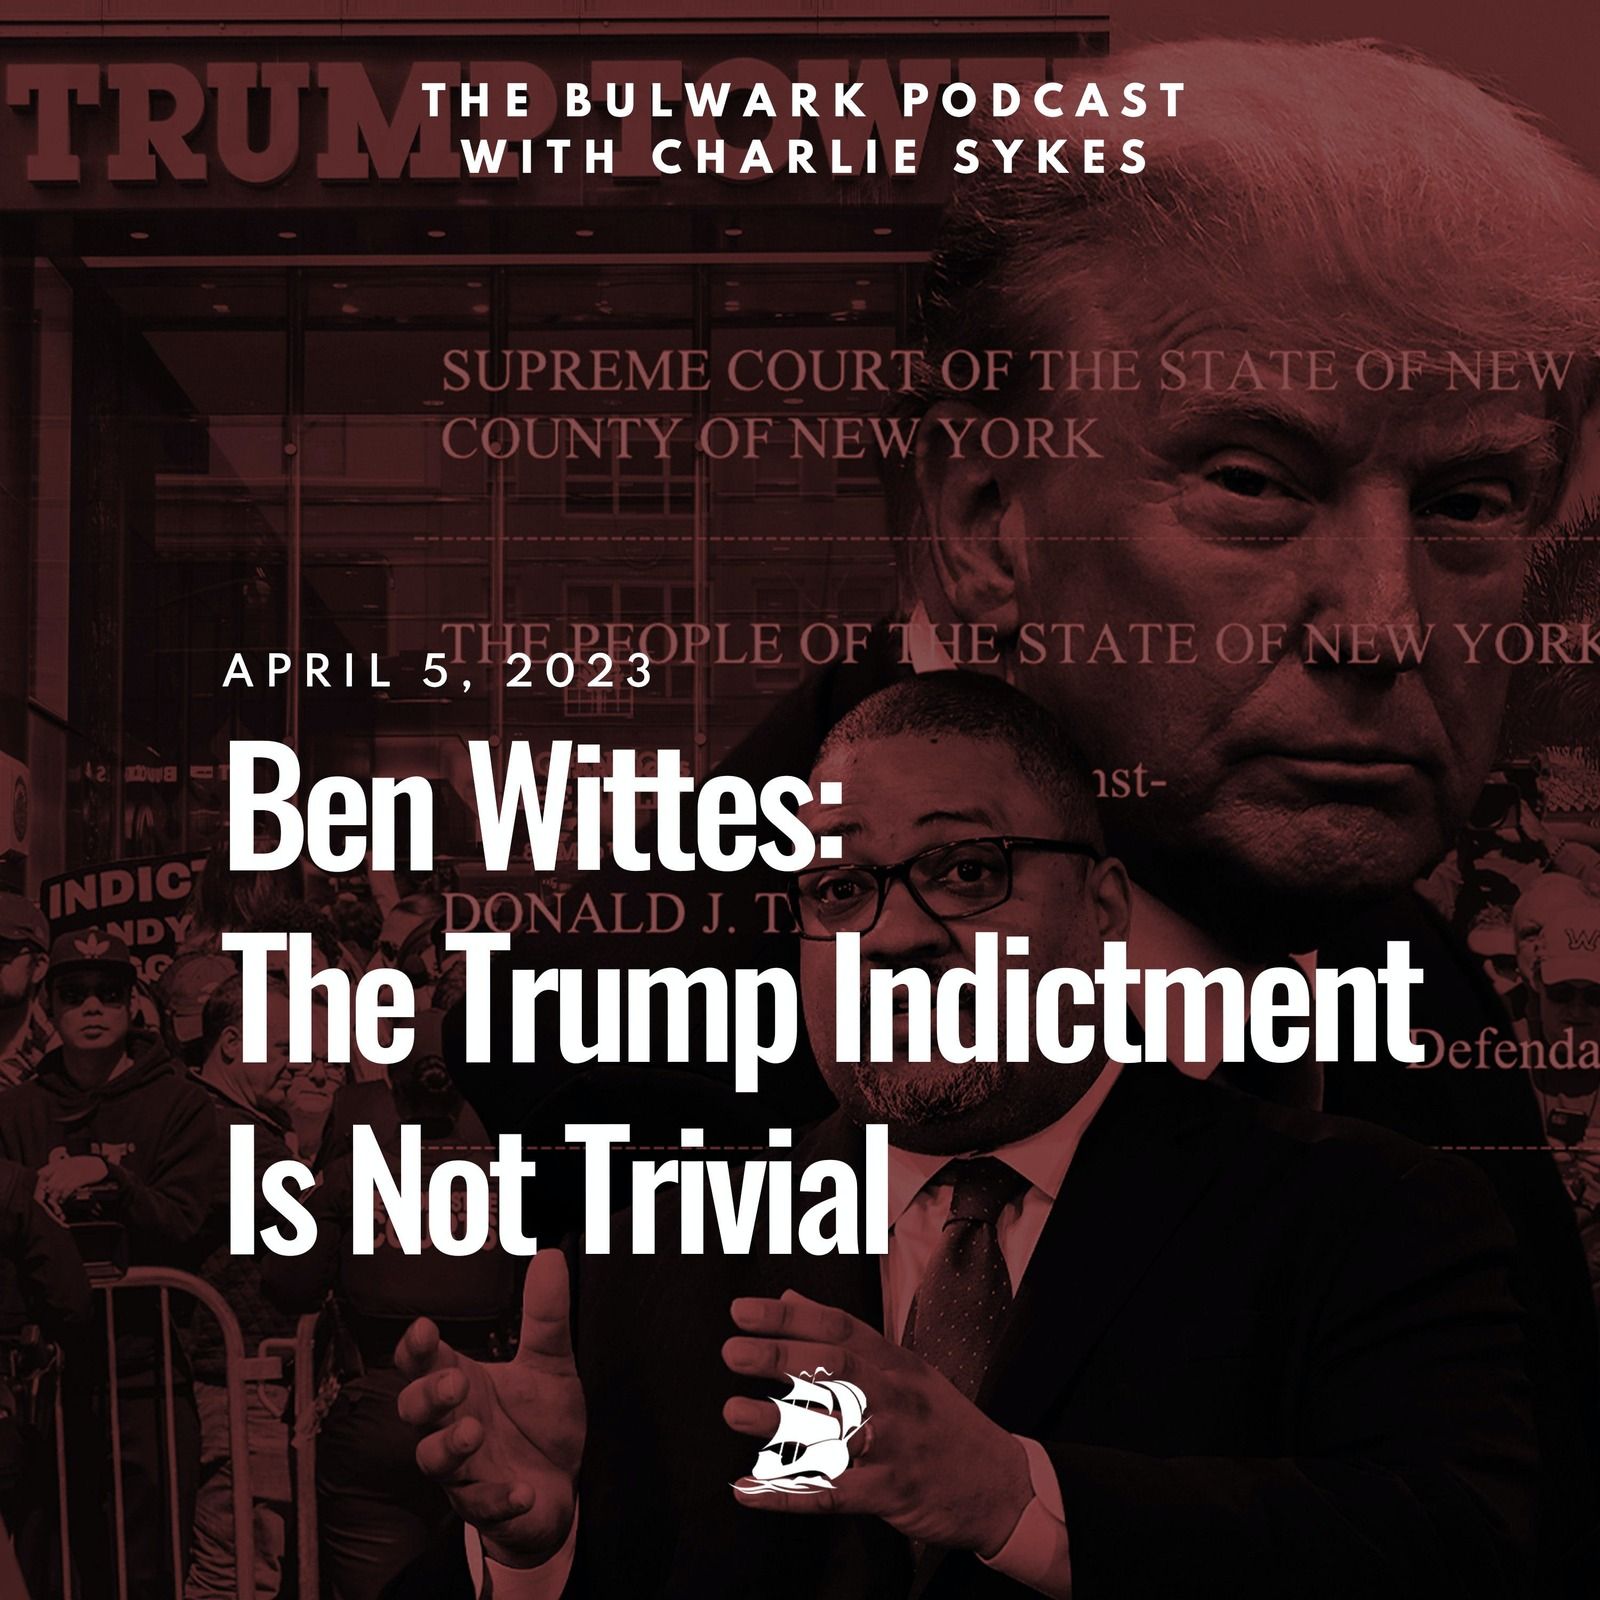 Ben Wittes: The Trump Indictment Is Not Trivial by The Bulwark Podcast